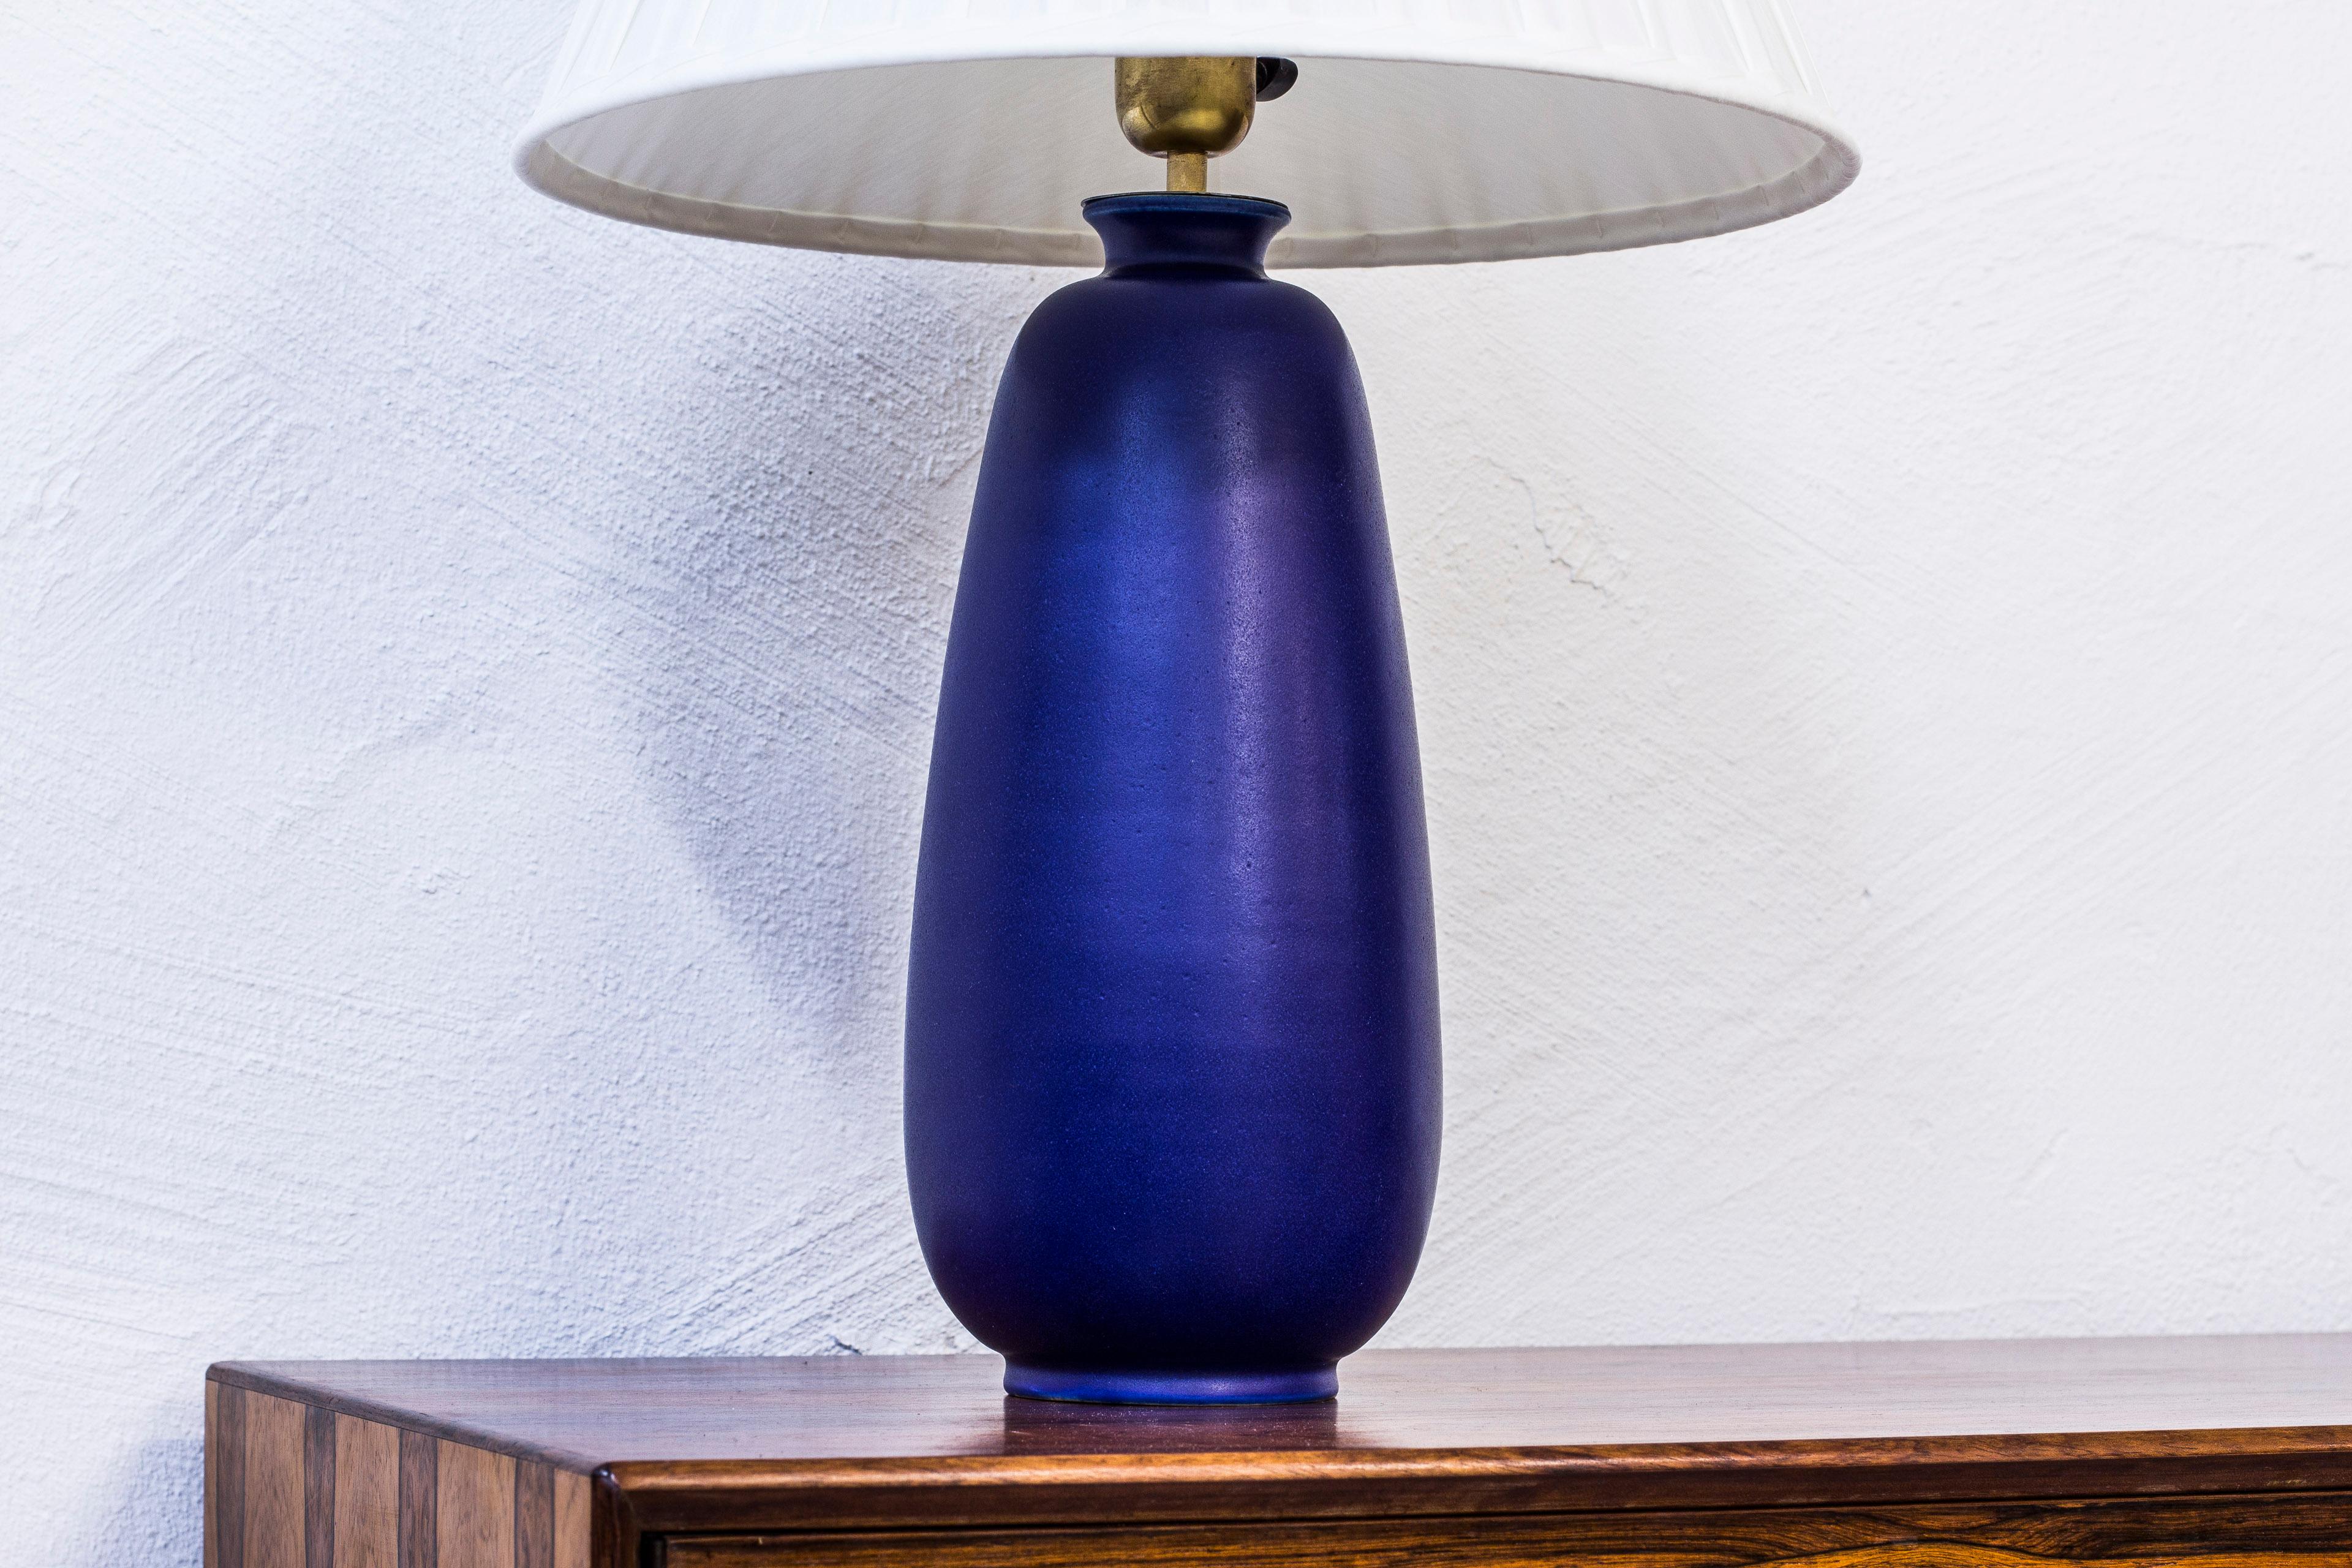 Unusually large table lamp designed and made by Erich & Ingrid Triller at their ceramic workshop Tobo, Sweden. Hand thrown stoneware with blue glaze. New lampshade hand-sewn in chintz fabric. Light switch on lighting fixture in working order.